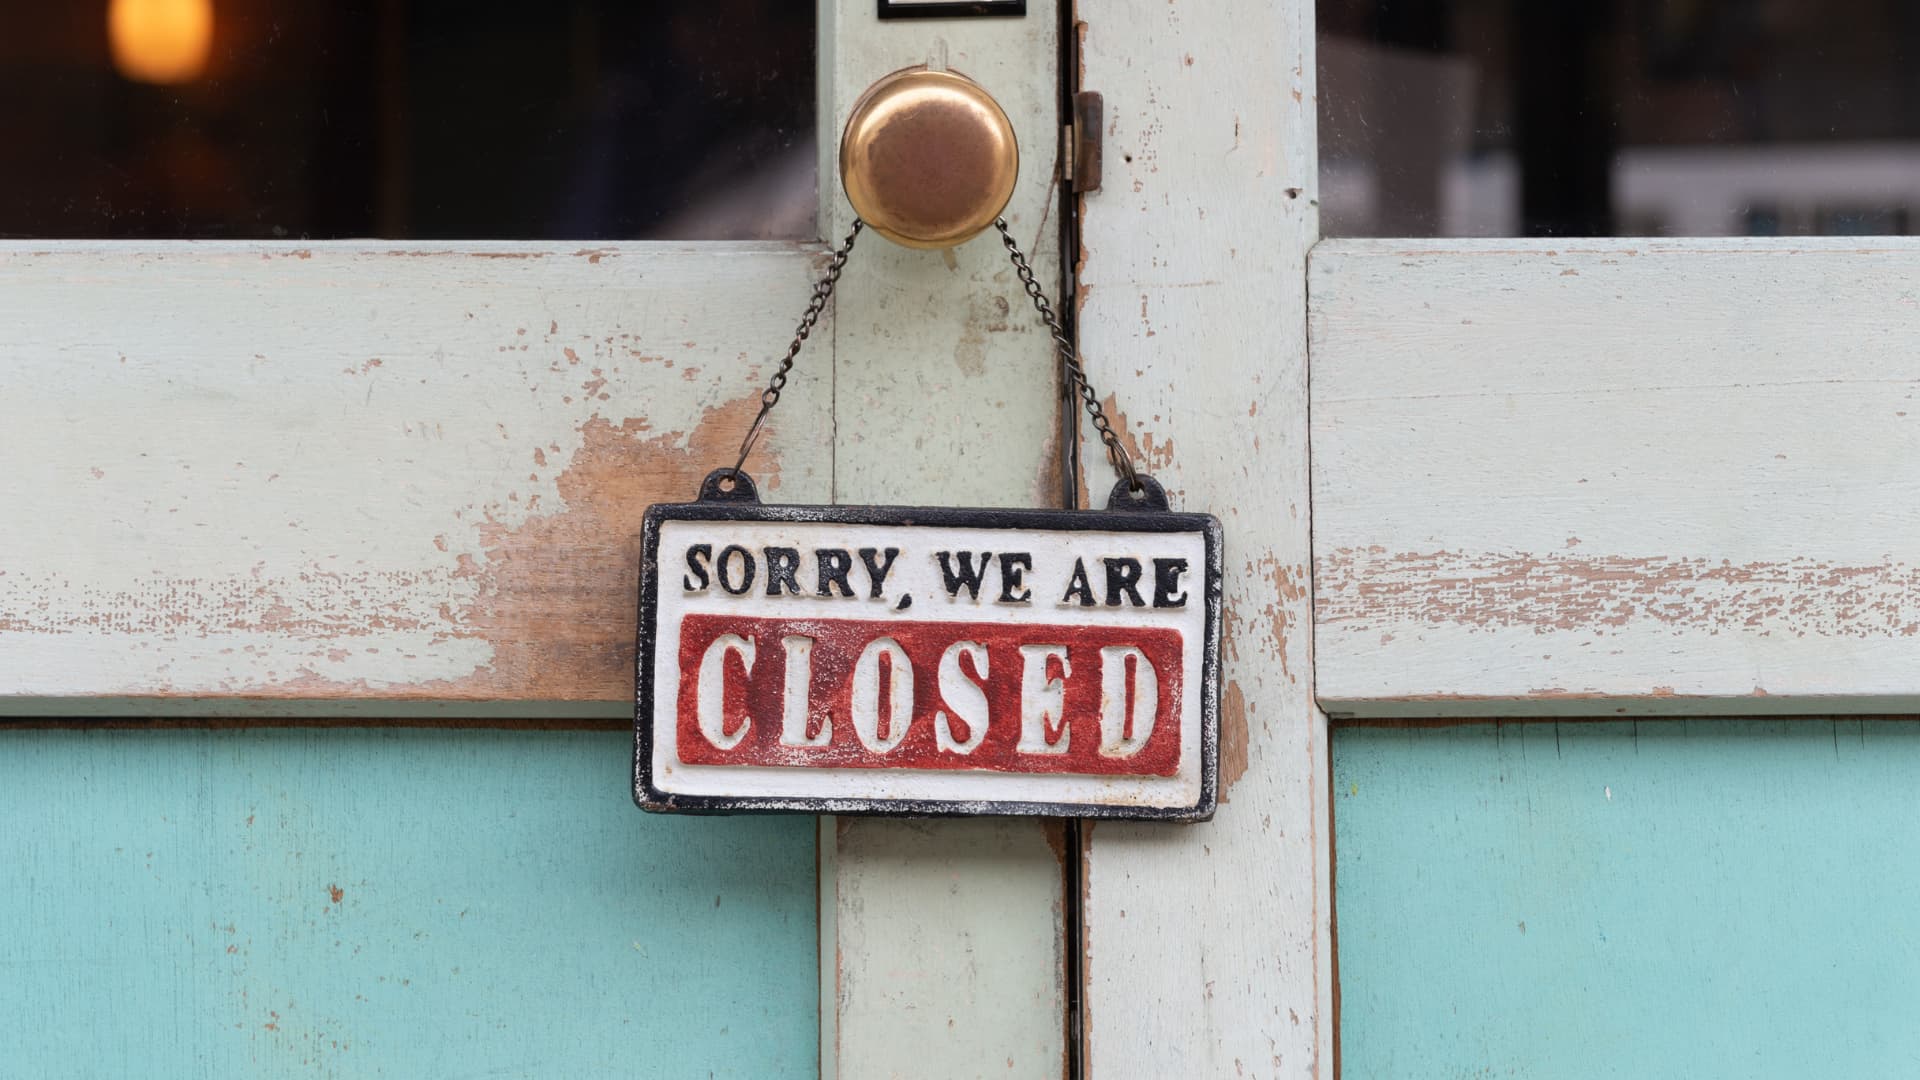 A "Sorry We Are Closed" sign hanging on a business door that is the featured image of the dissolution of Florida Limited Liability Company.